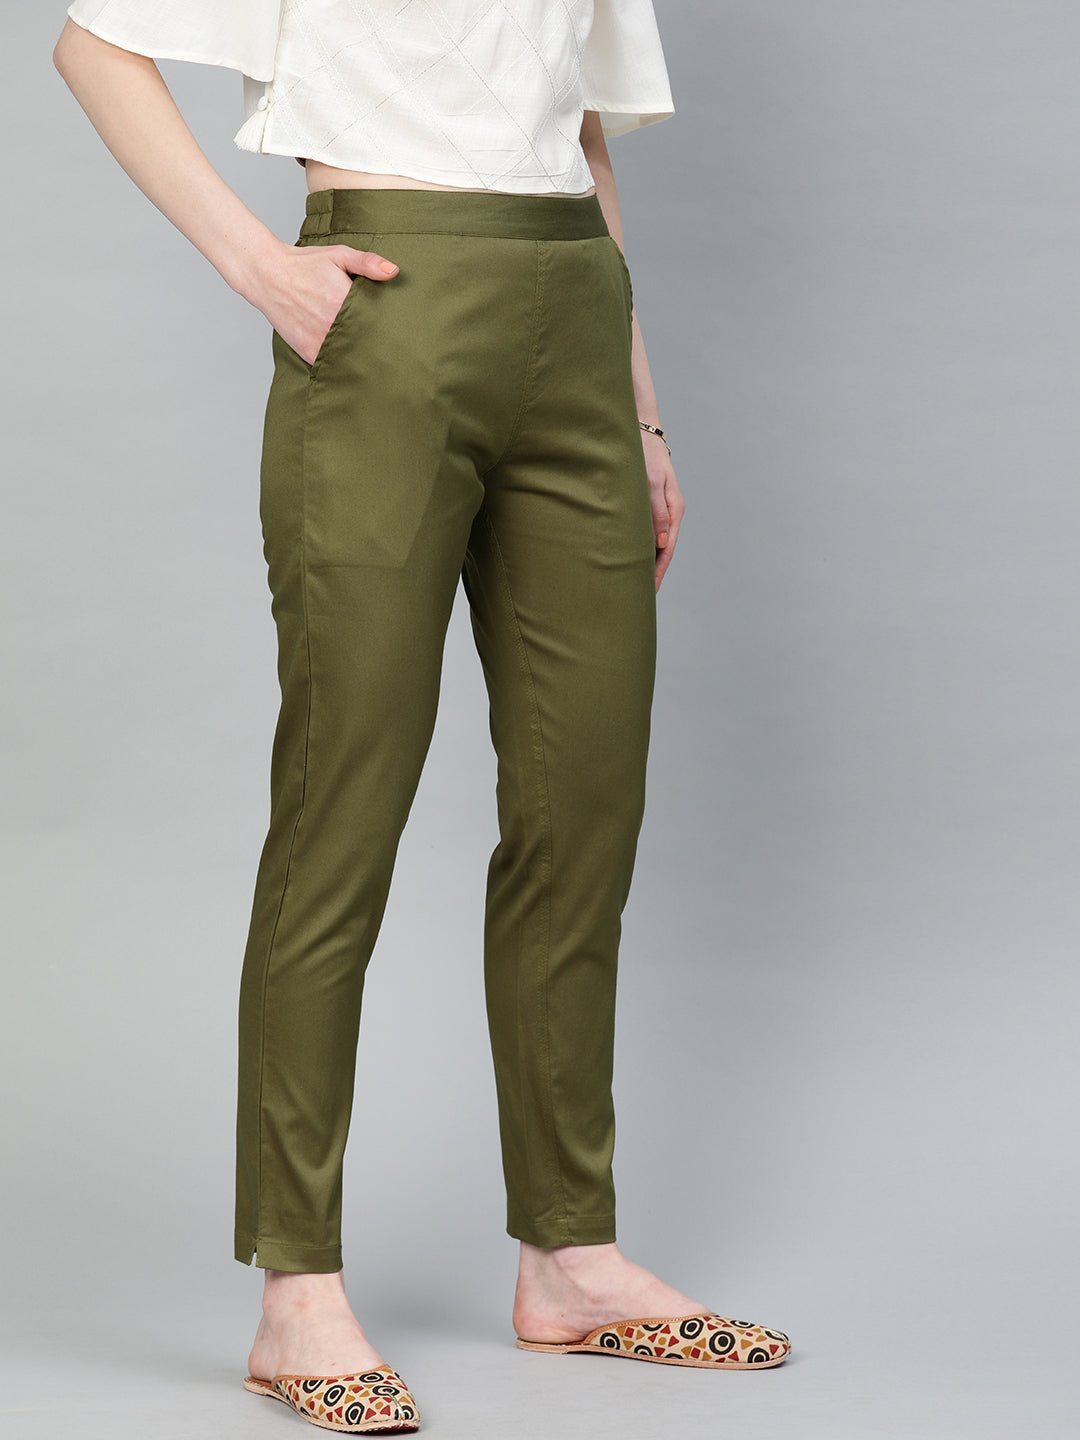 Shop Casual Pants for ladies